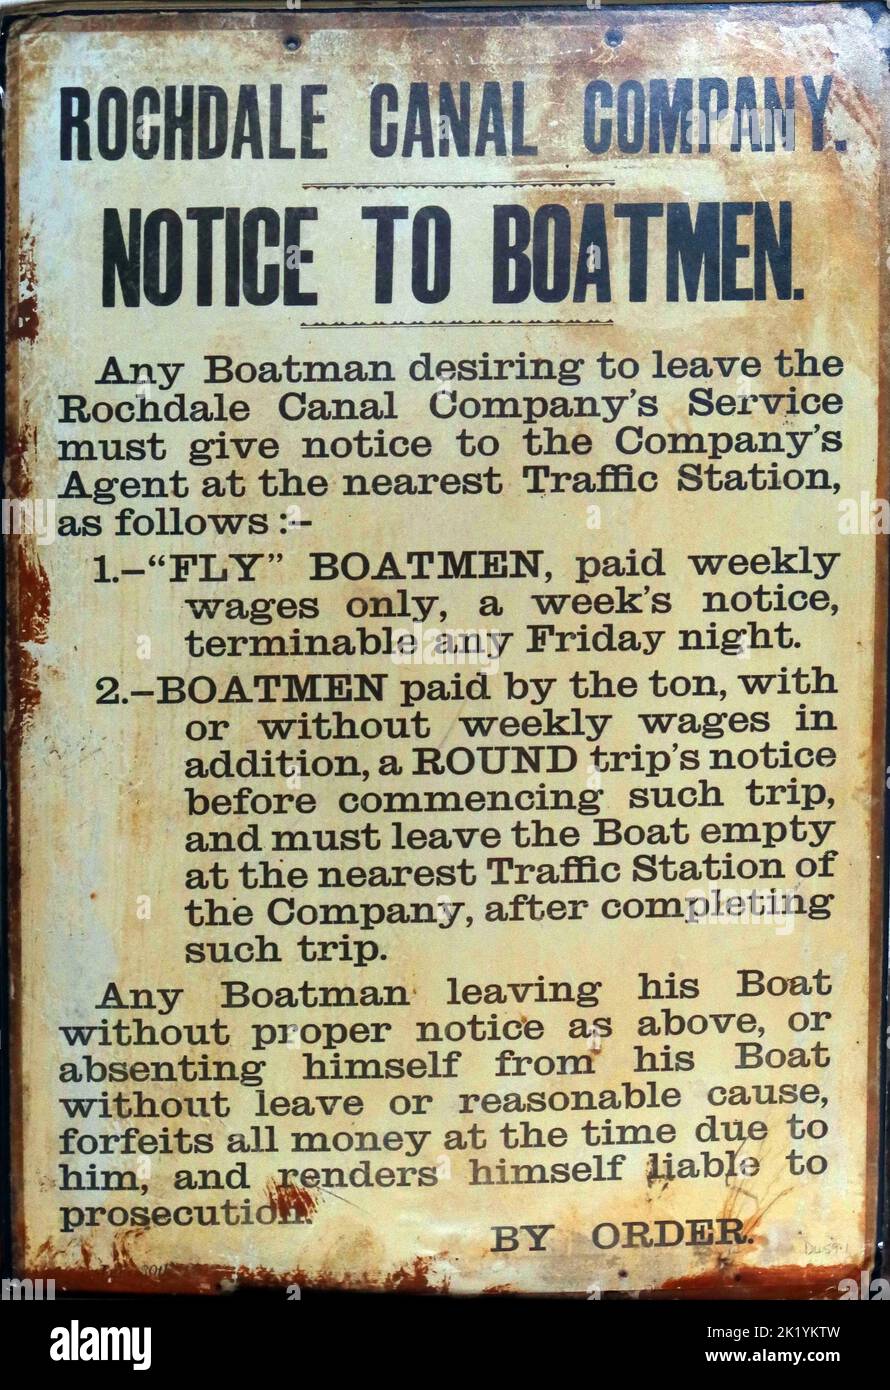 Metal enamel sign, Rochdale Canal Company, Notice To Boatmen sign, labour regulations, giving notice rules by order & liable for prosecution Stock Photo